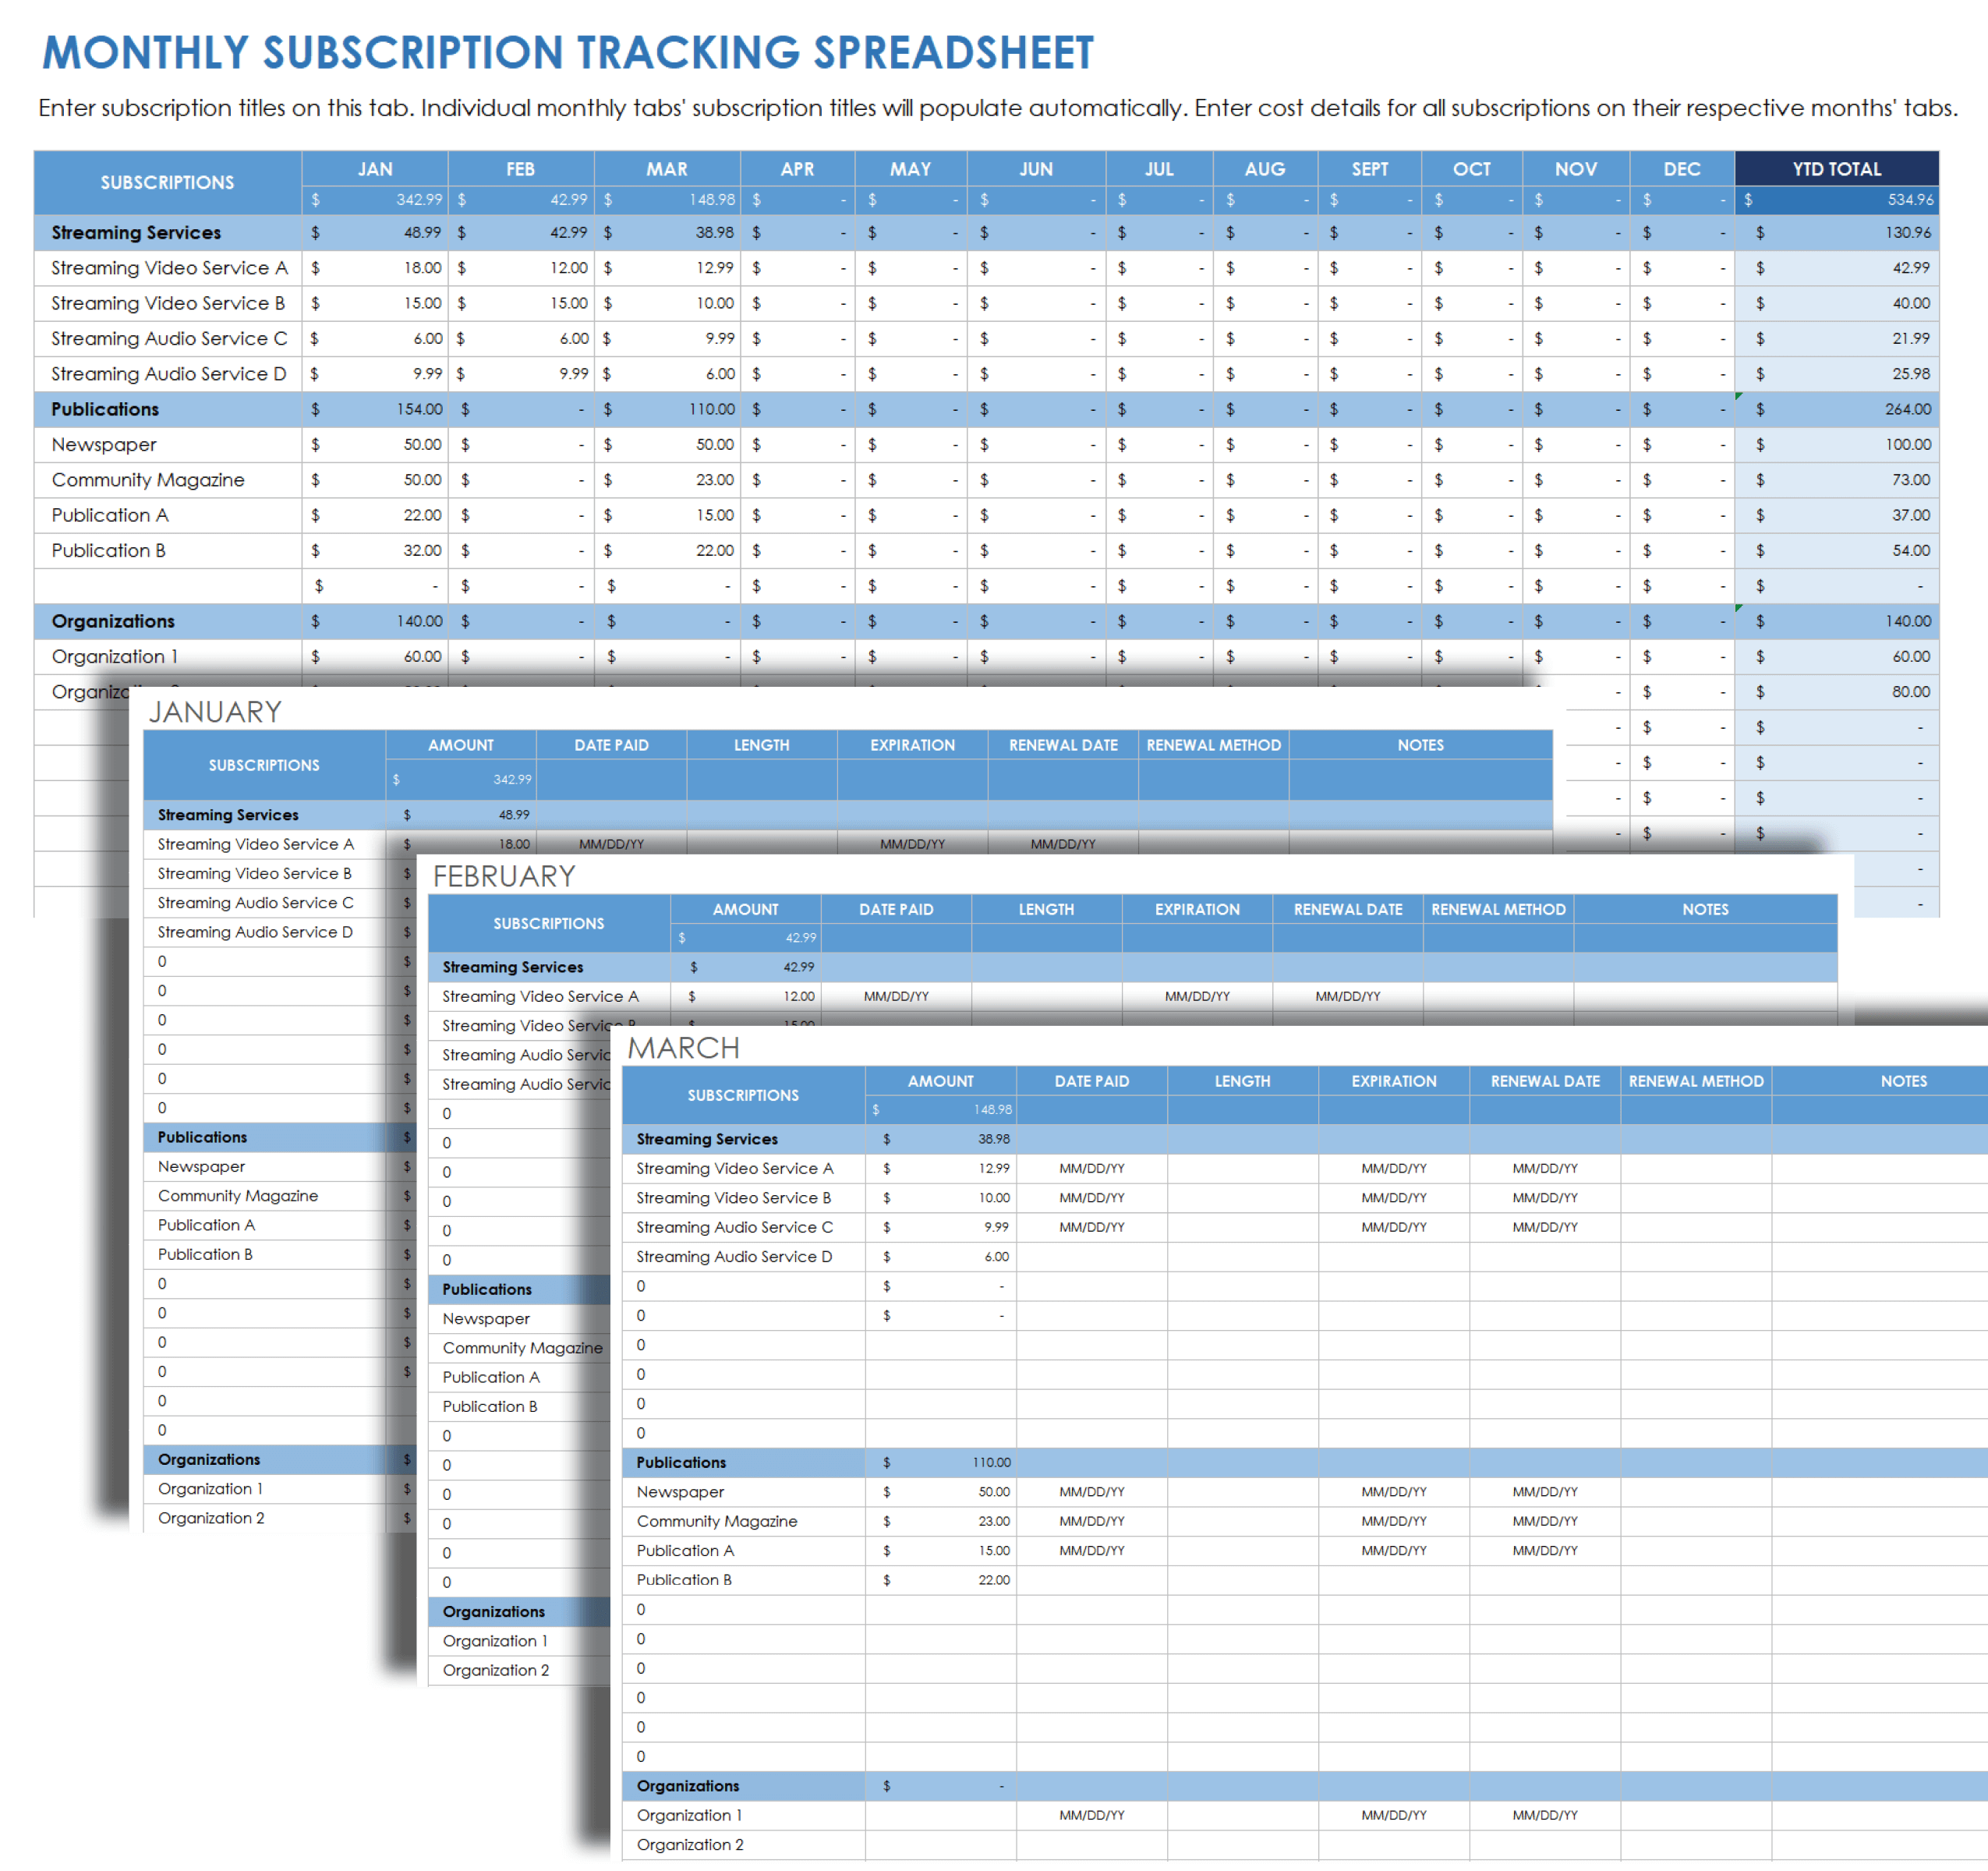 Monthly Subscription Tracking Spreadsheet